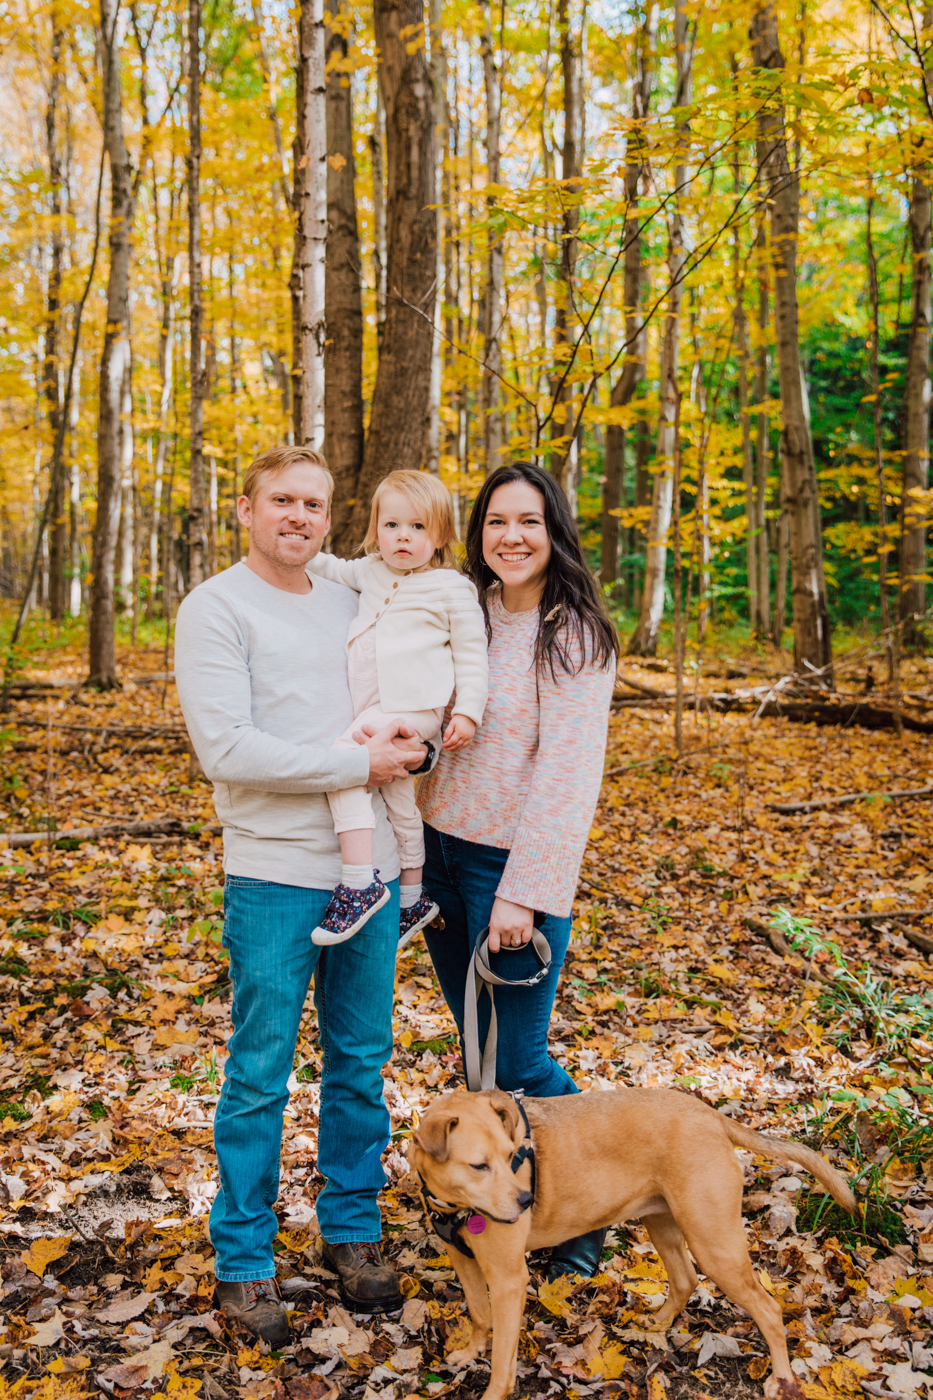  Family photographer Brittany Juravich takes fall family photos in the woods in Central NY 